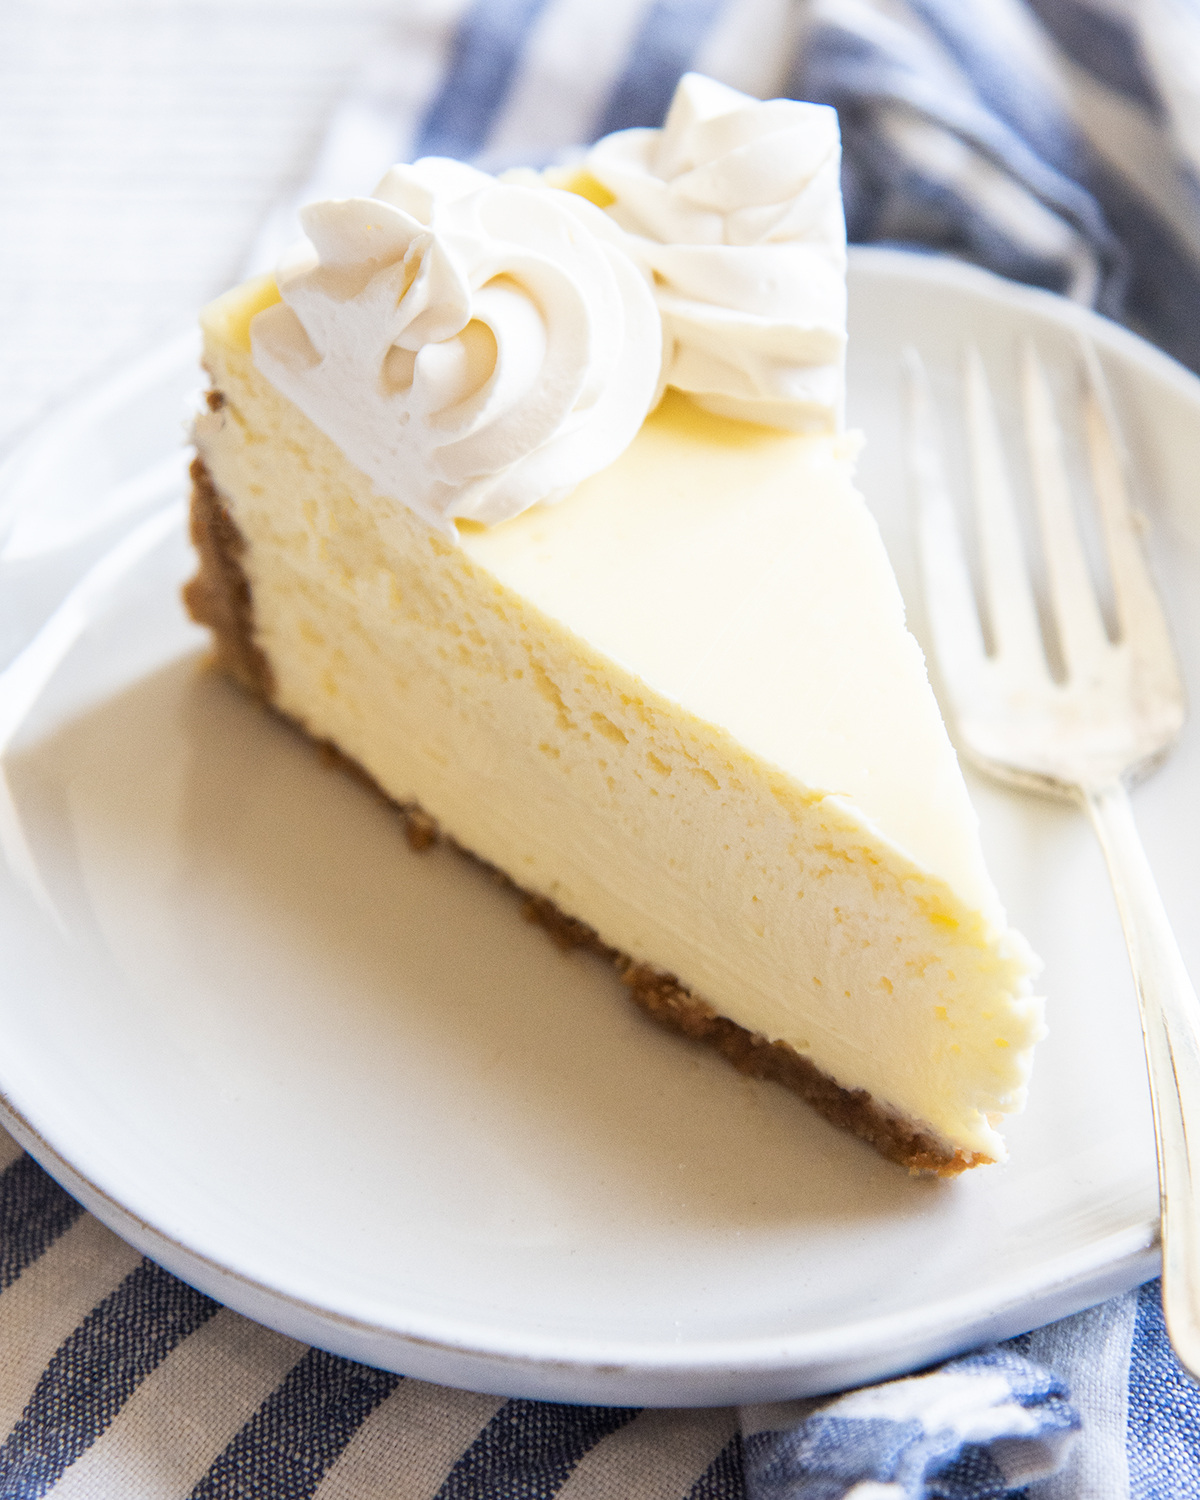 A slice of classic cheesecake on a plate topped with two rosettes of whipped cream on the end.